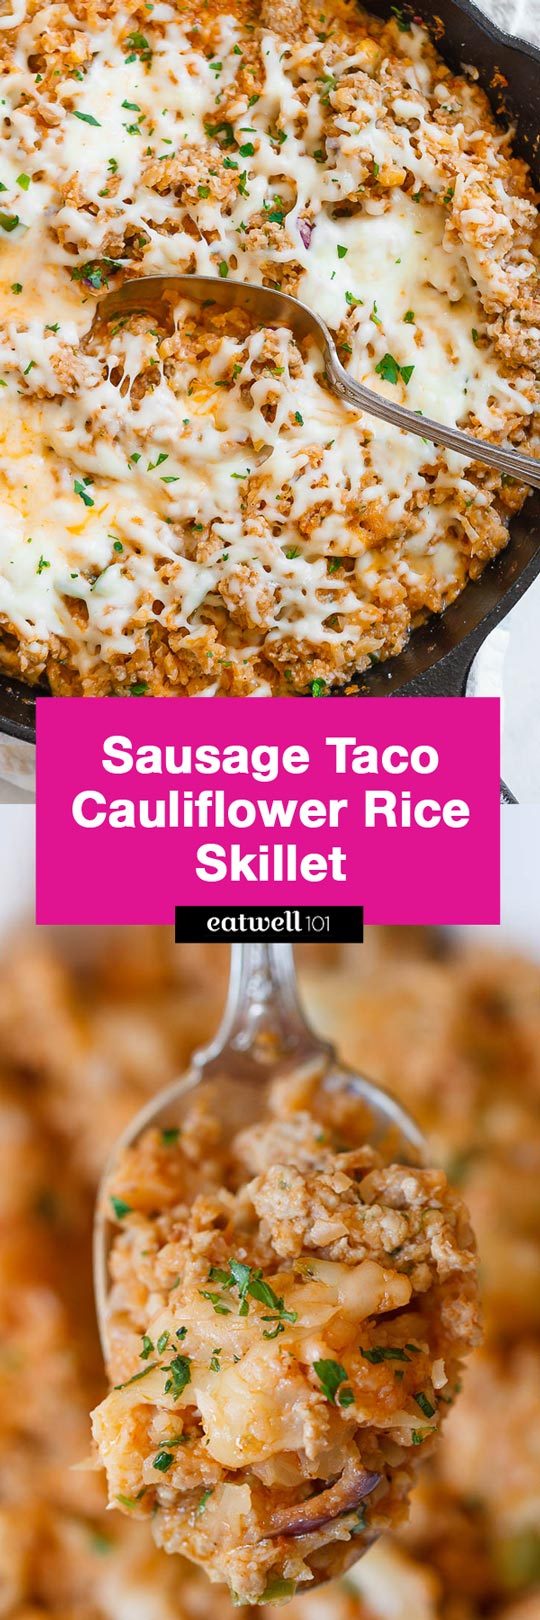 Sausage Taco Cauliflower Rice Skillet - #keto #lowcarb #eatwell101 #recipe - A nutritious low-carb, keto, paleo main dish for dinner.